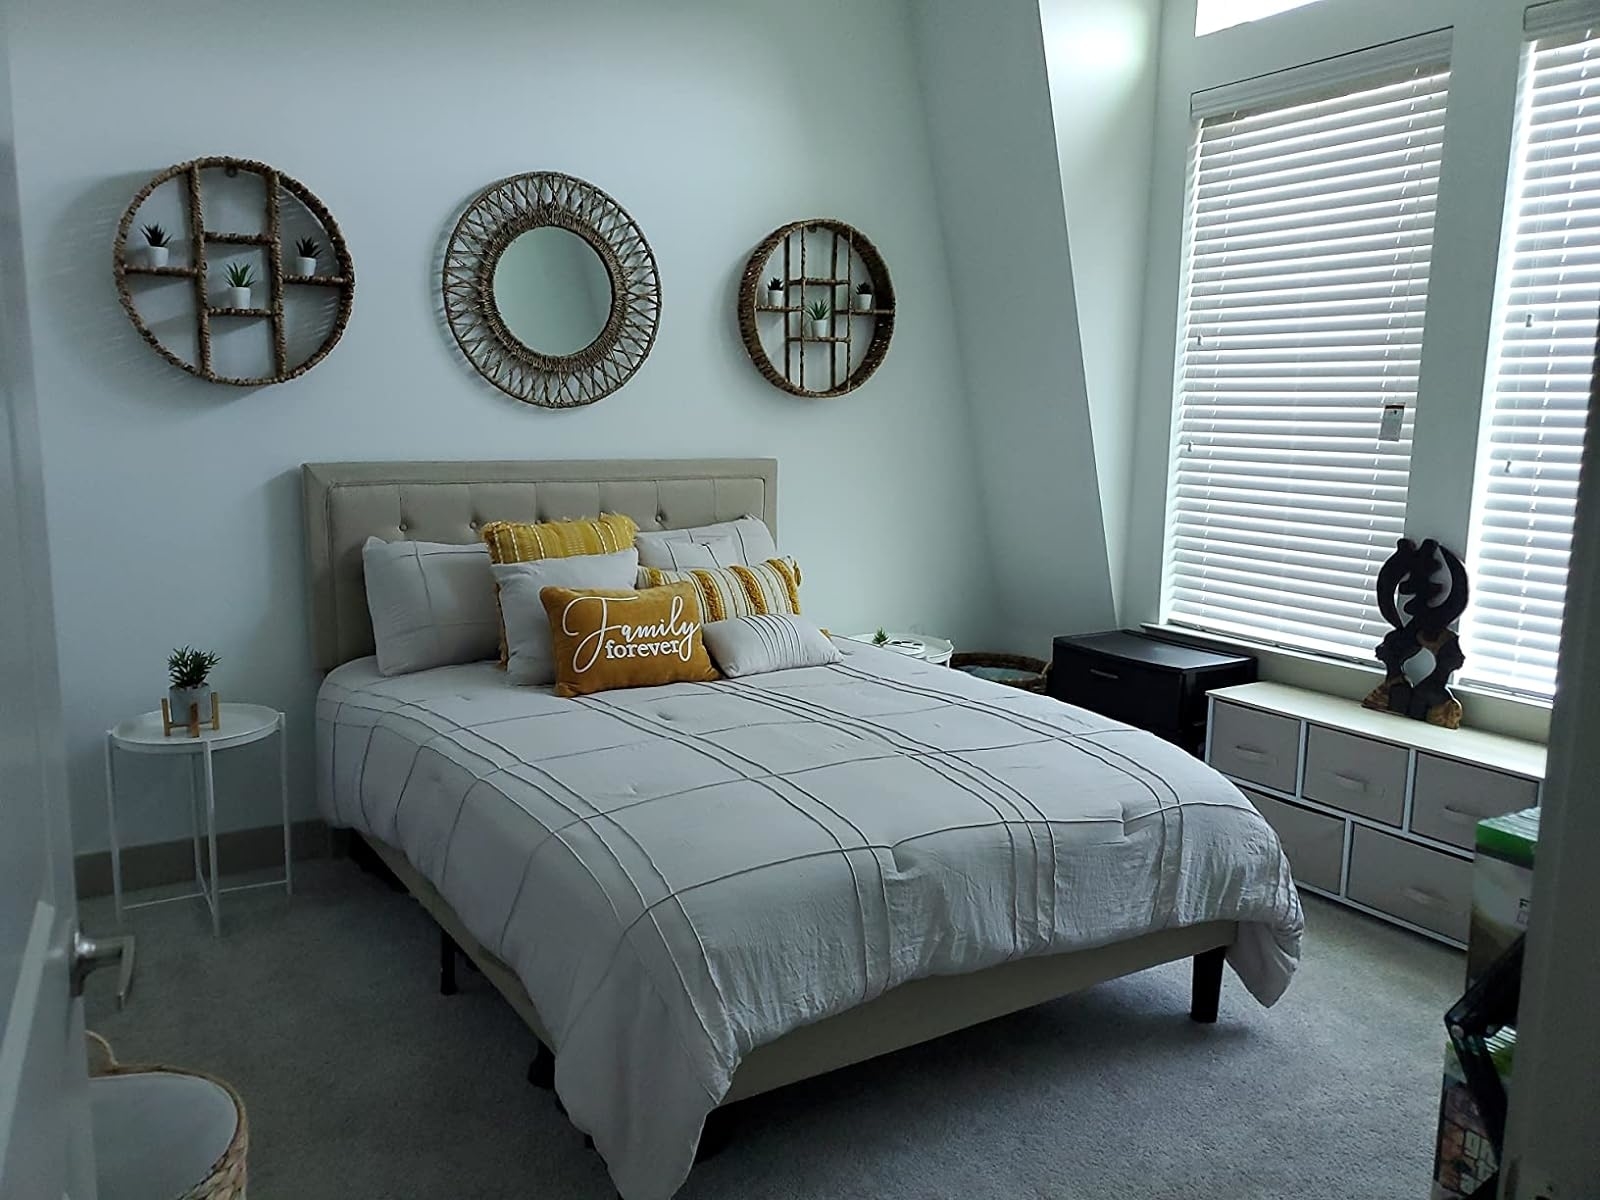 20 Platform Beds To Give Your Bedroom A Stylish Lift